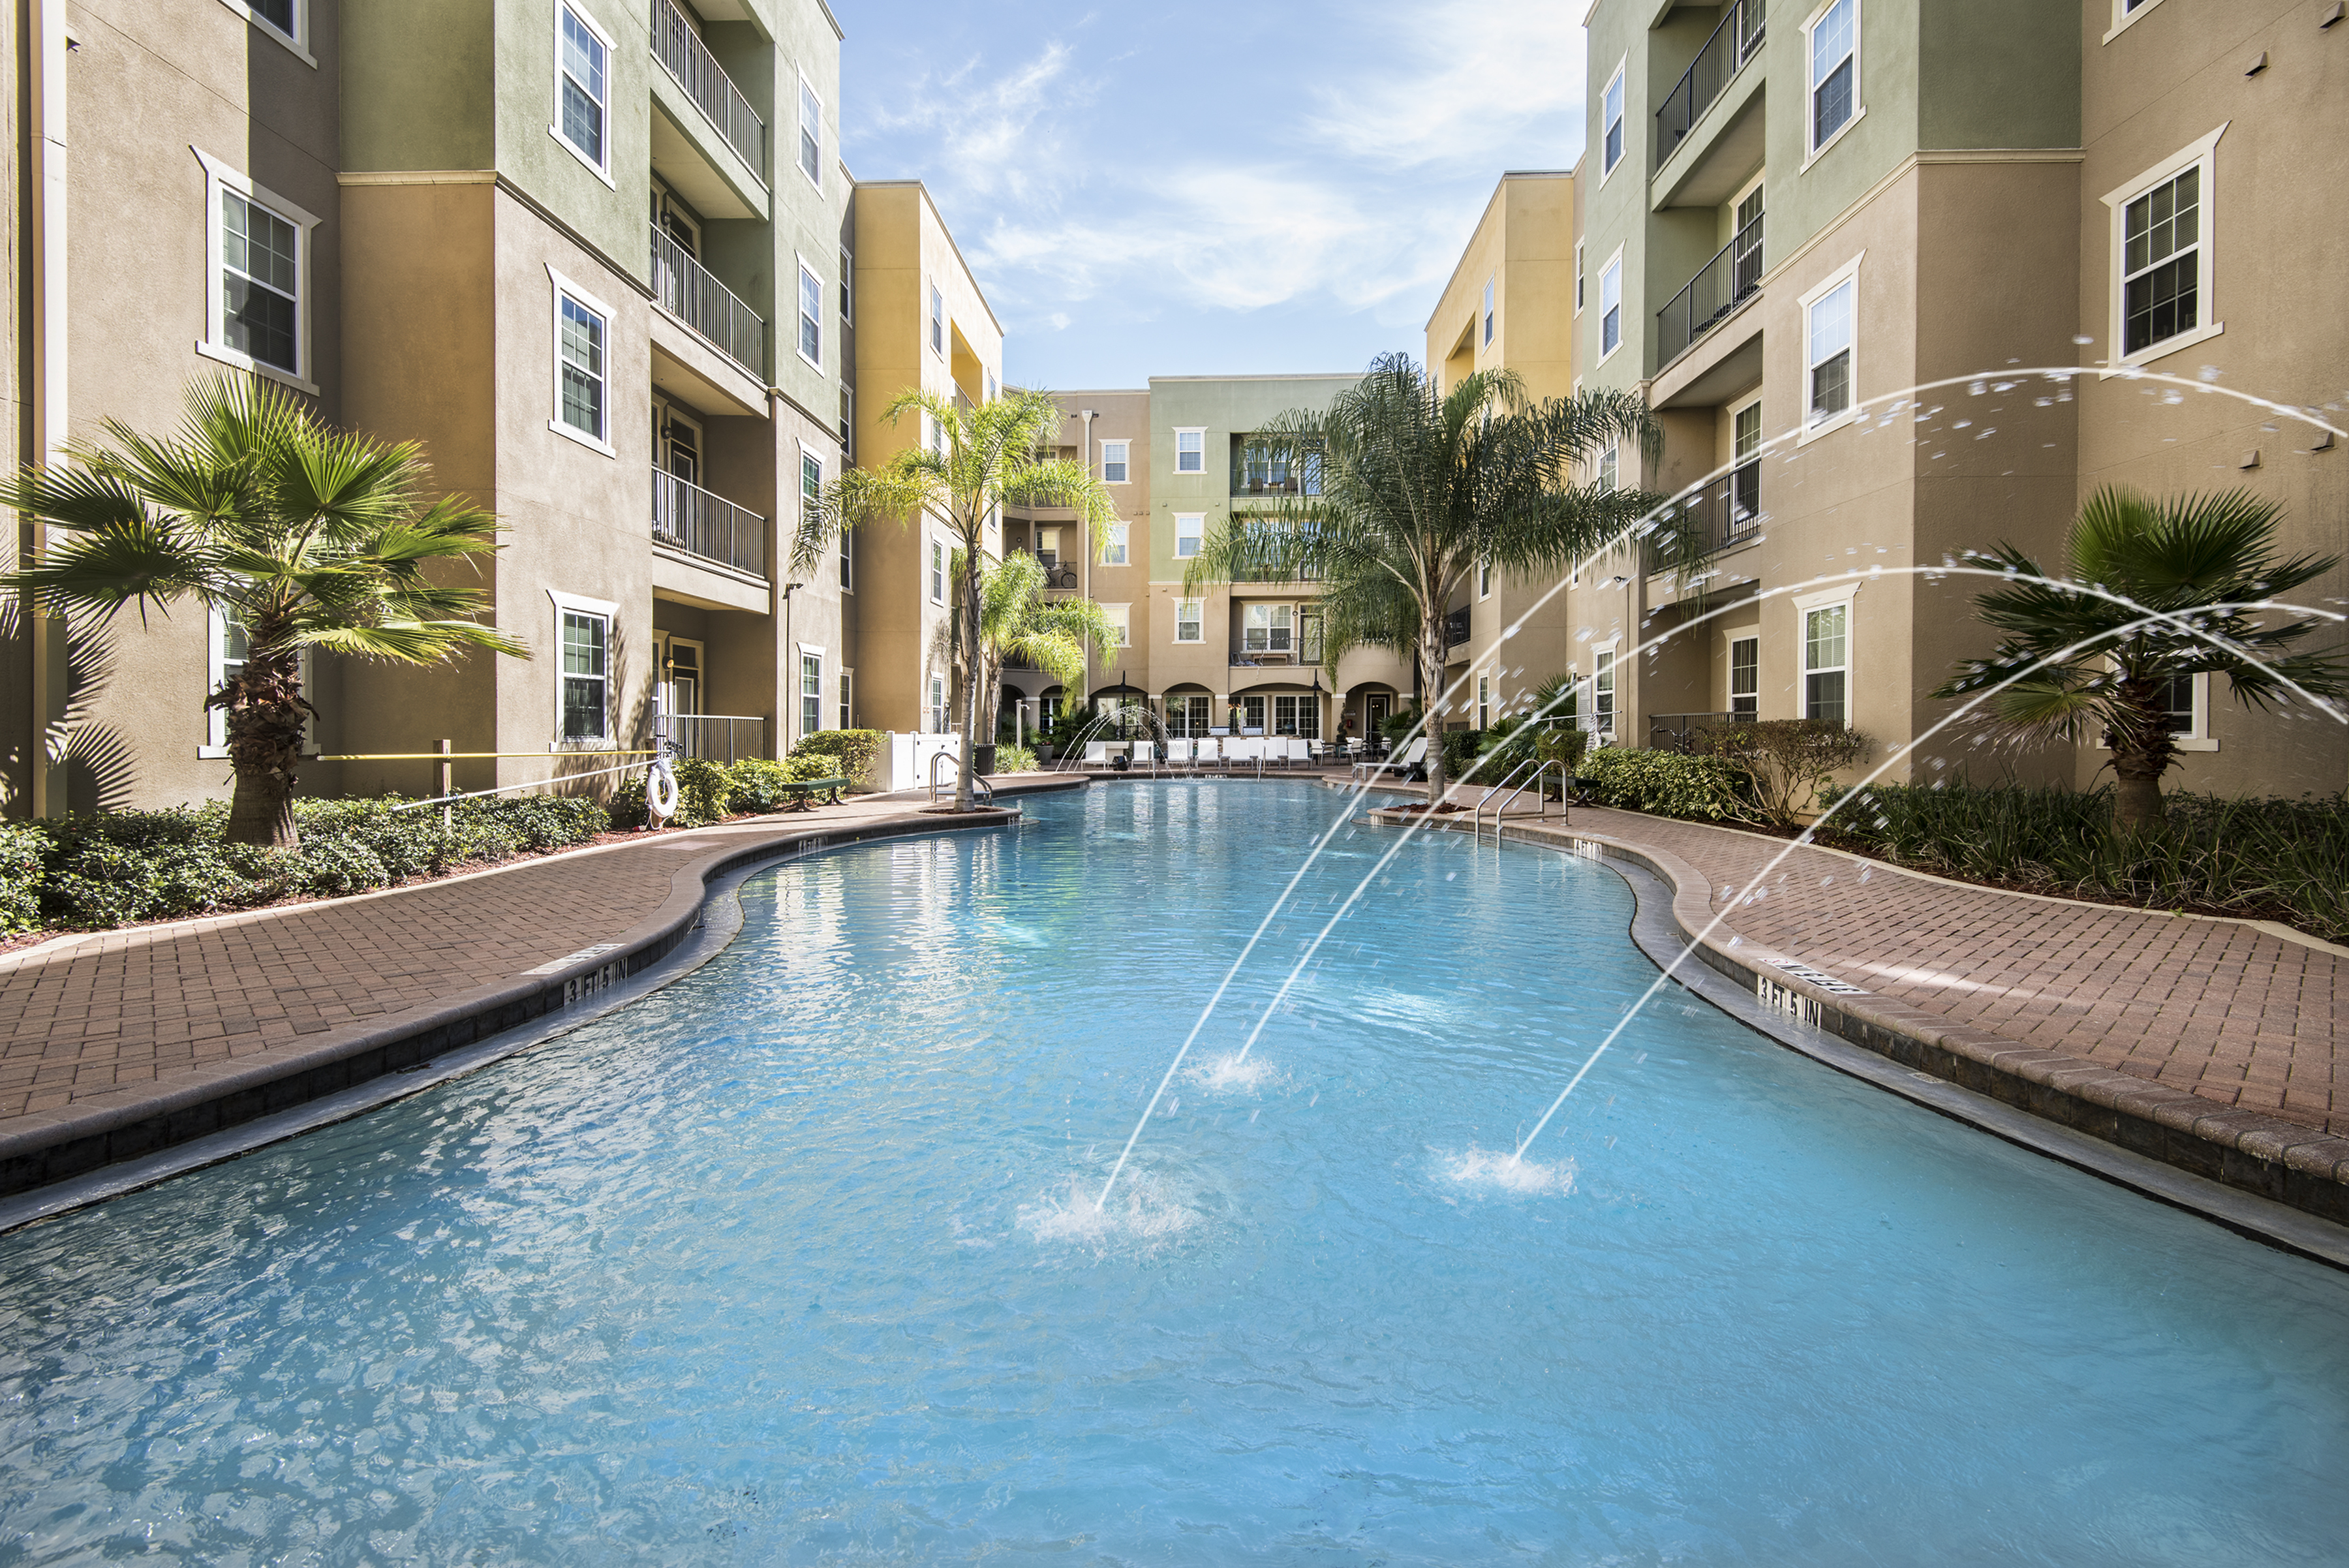 4050 Lofts Apartments In Tampa